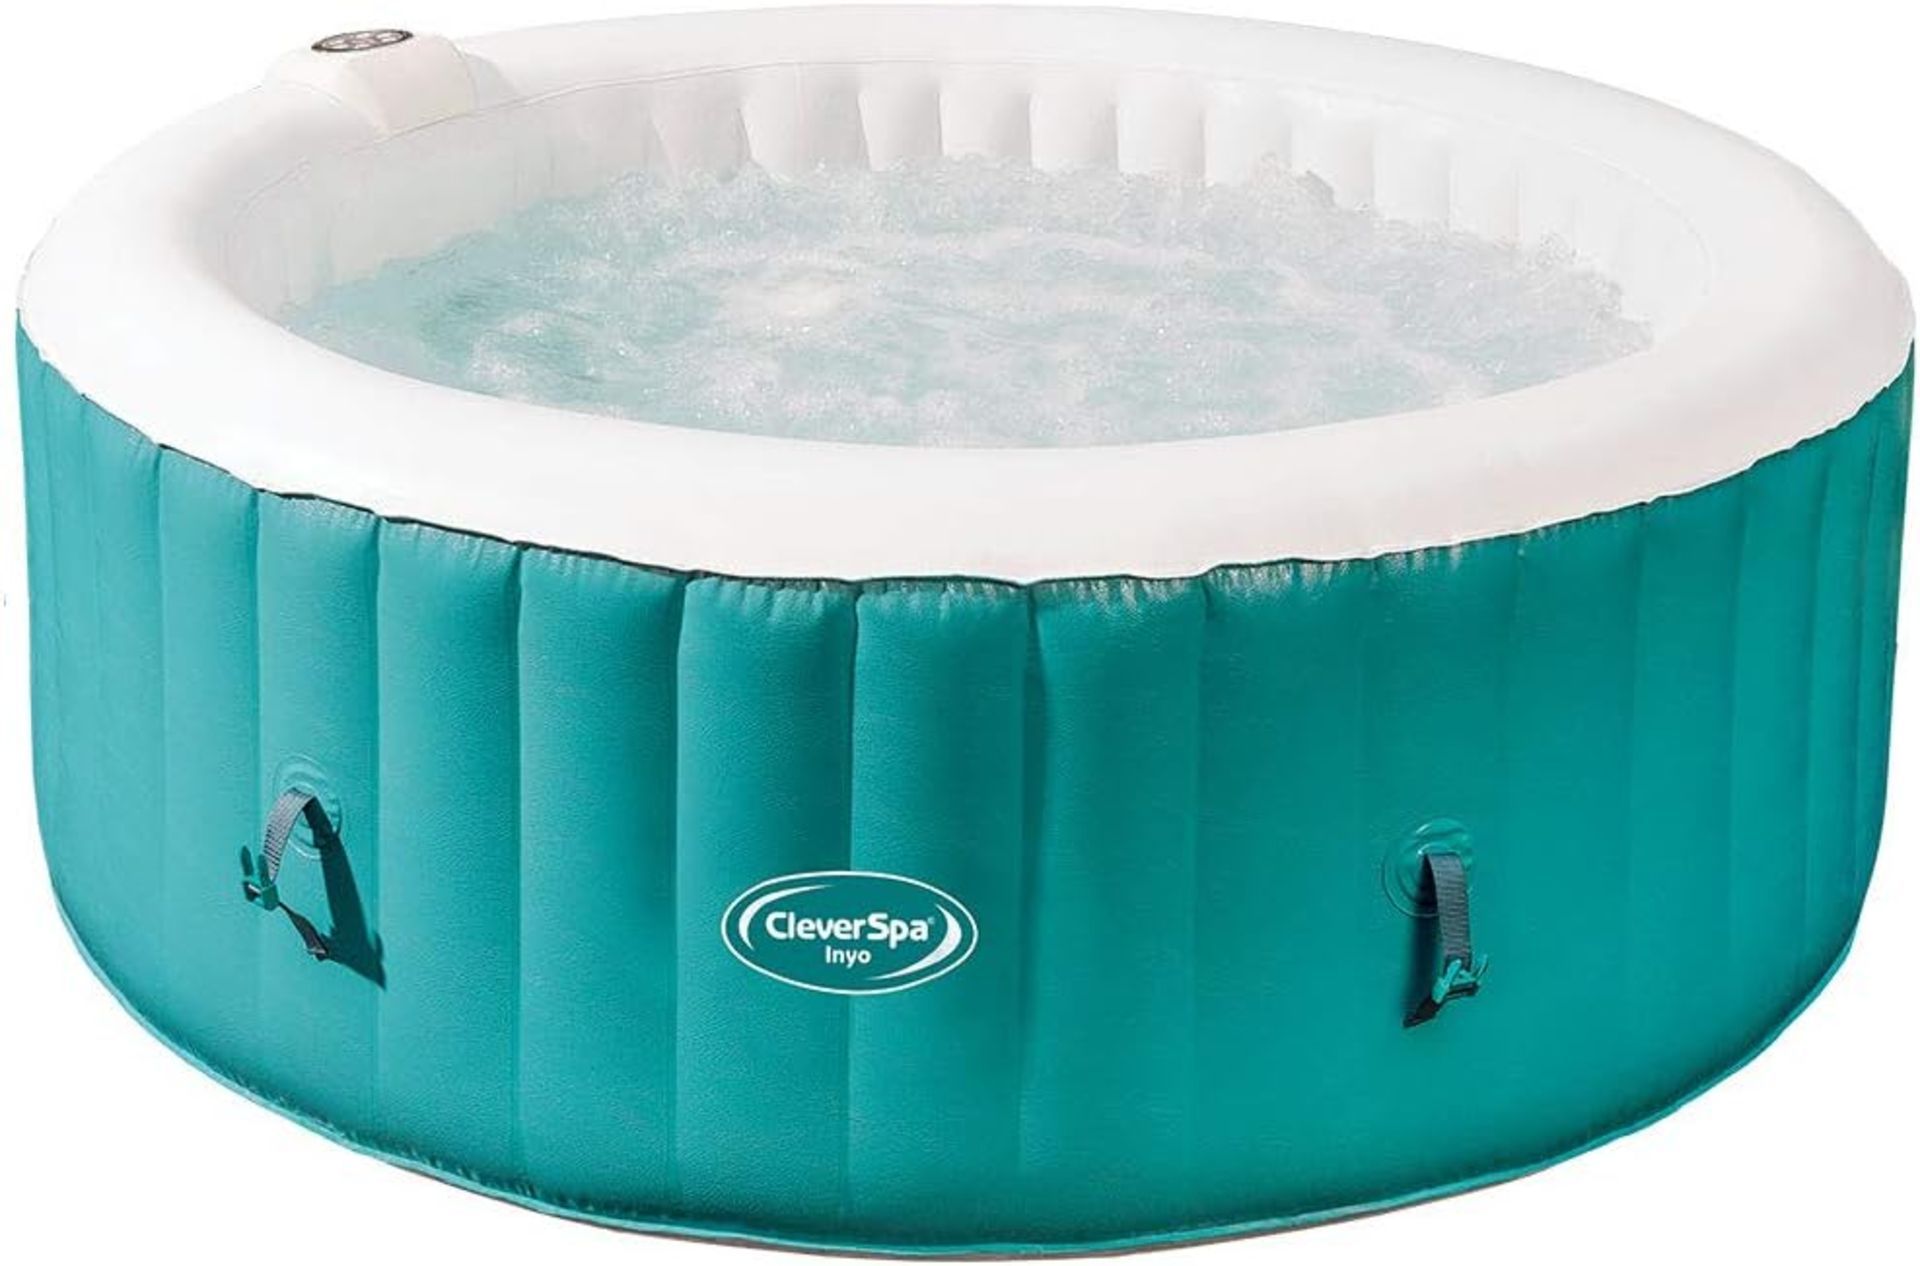 New & Boxed CleverSpa Inyo 4 Person Hot Tub. RRP £499.99. There is no occasion or family get - Image 3 of 5